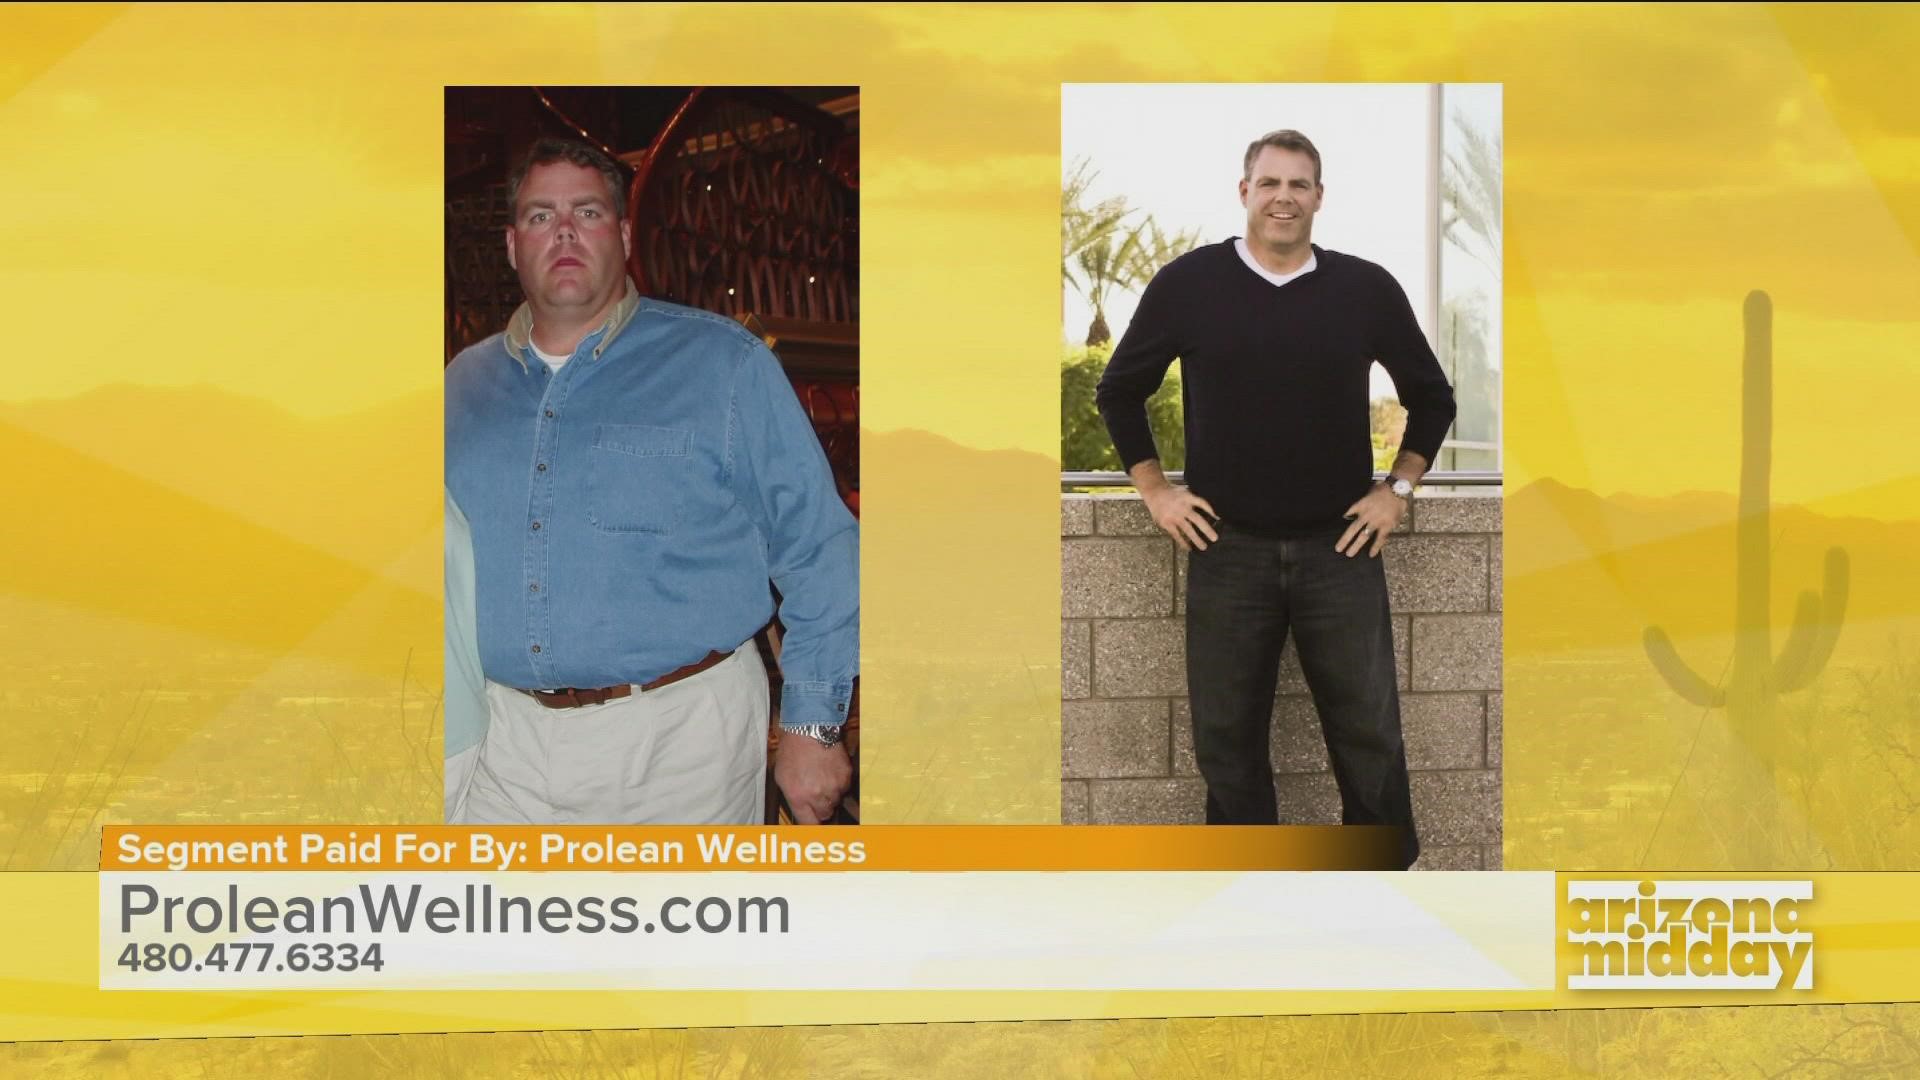 Jeff Dana, owner of Prolean Wellness, says their program offers healthy weight loss solutions with a one-on-one approach.